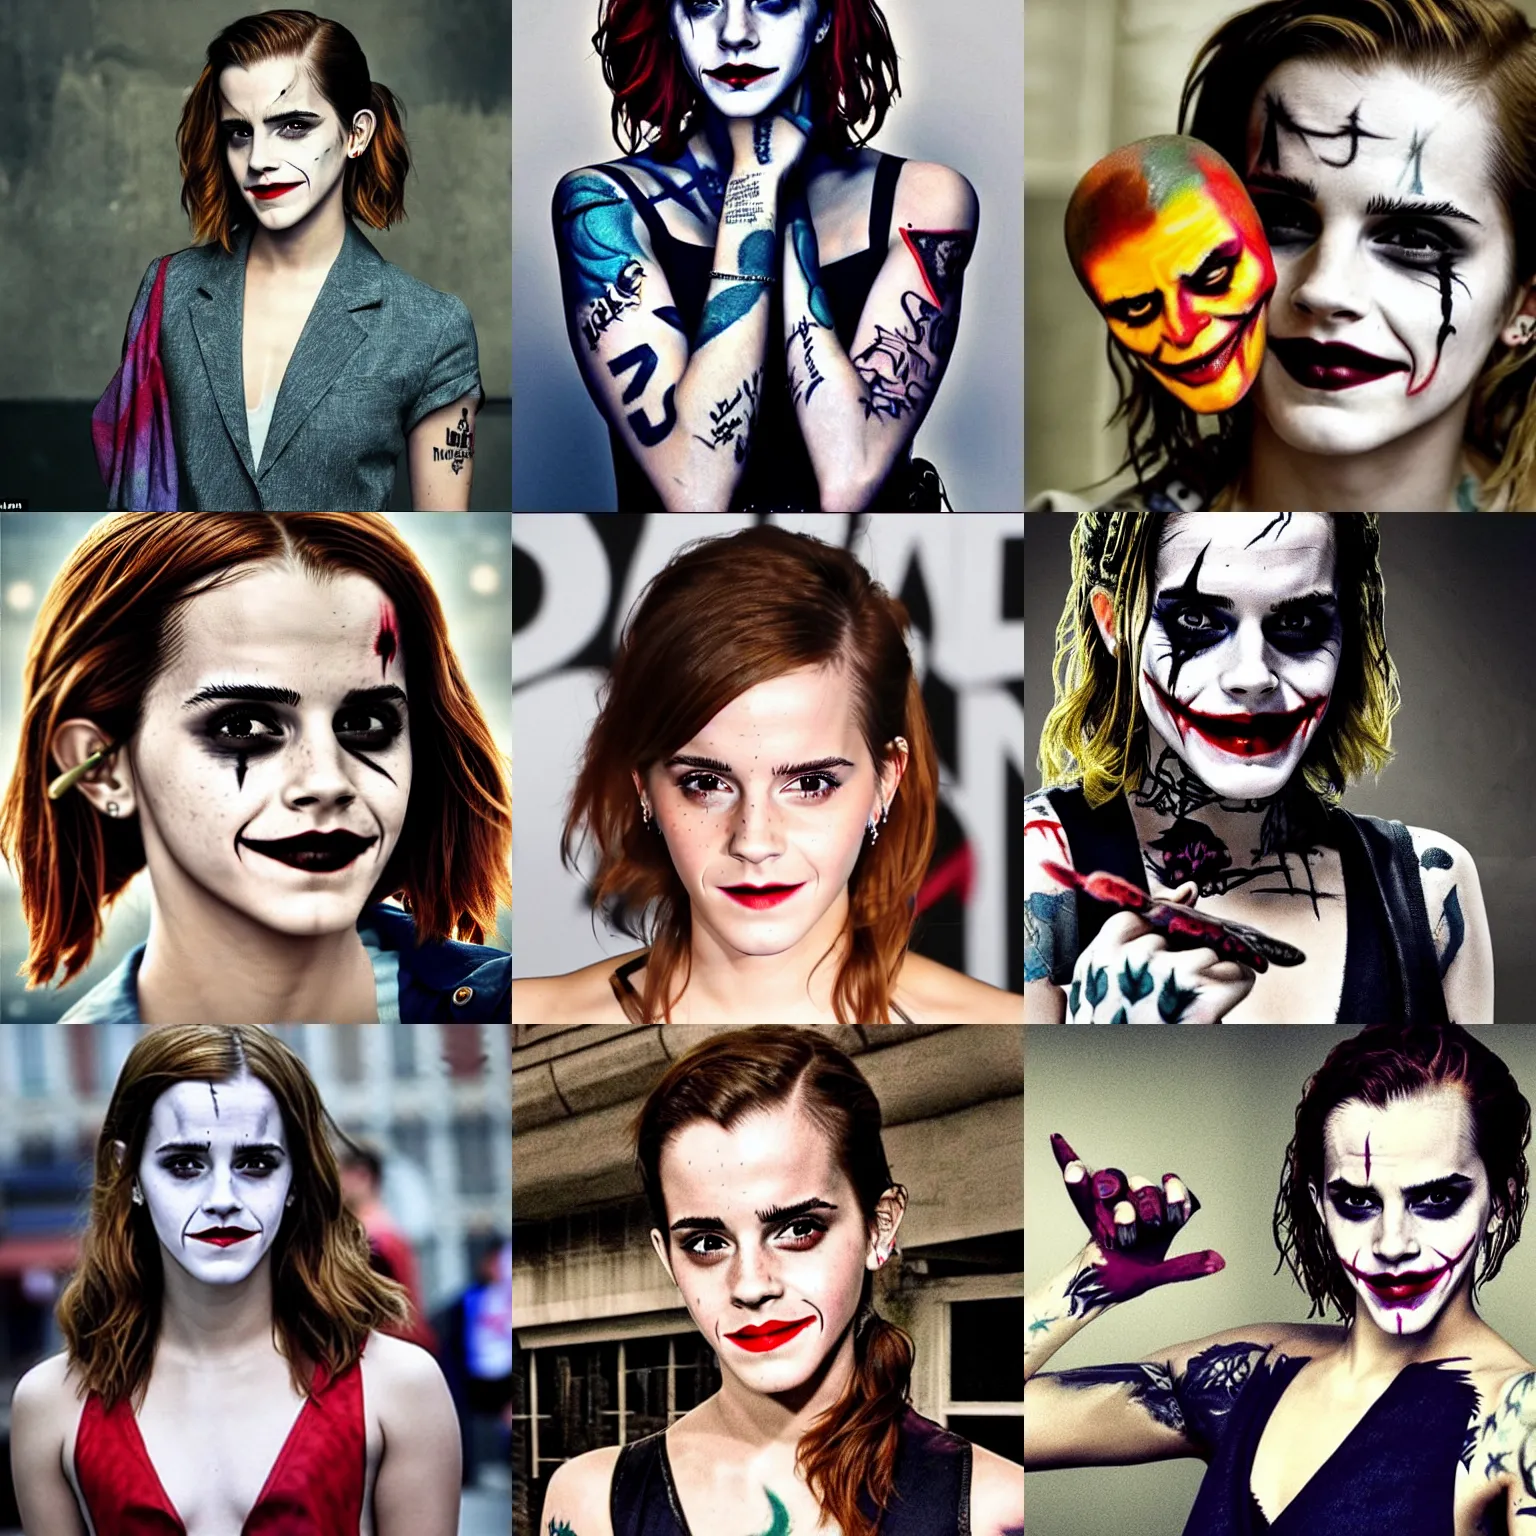 Prompt: emma watson with the face tatoos of the joker from suicide squad, demented damaged smile